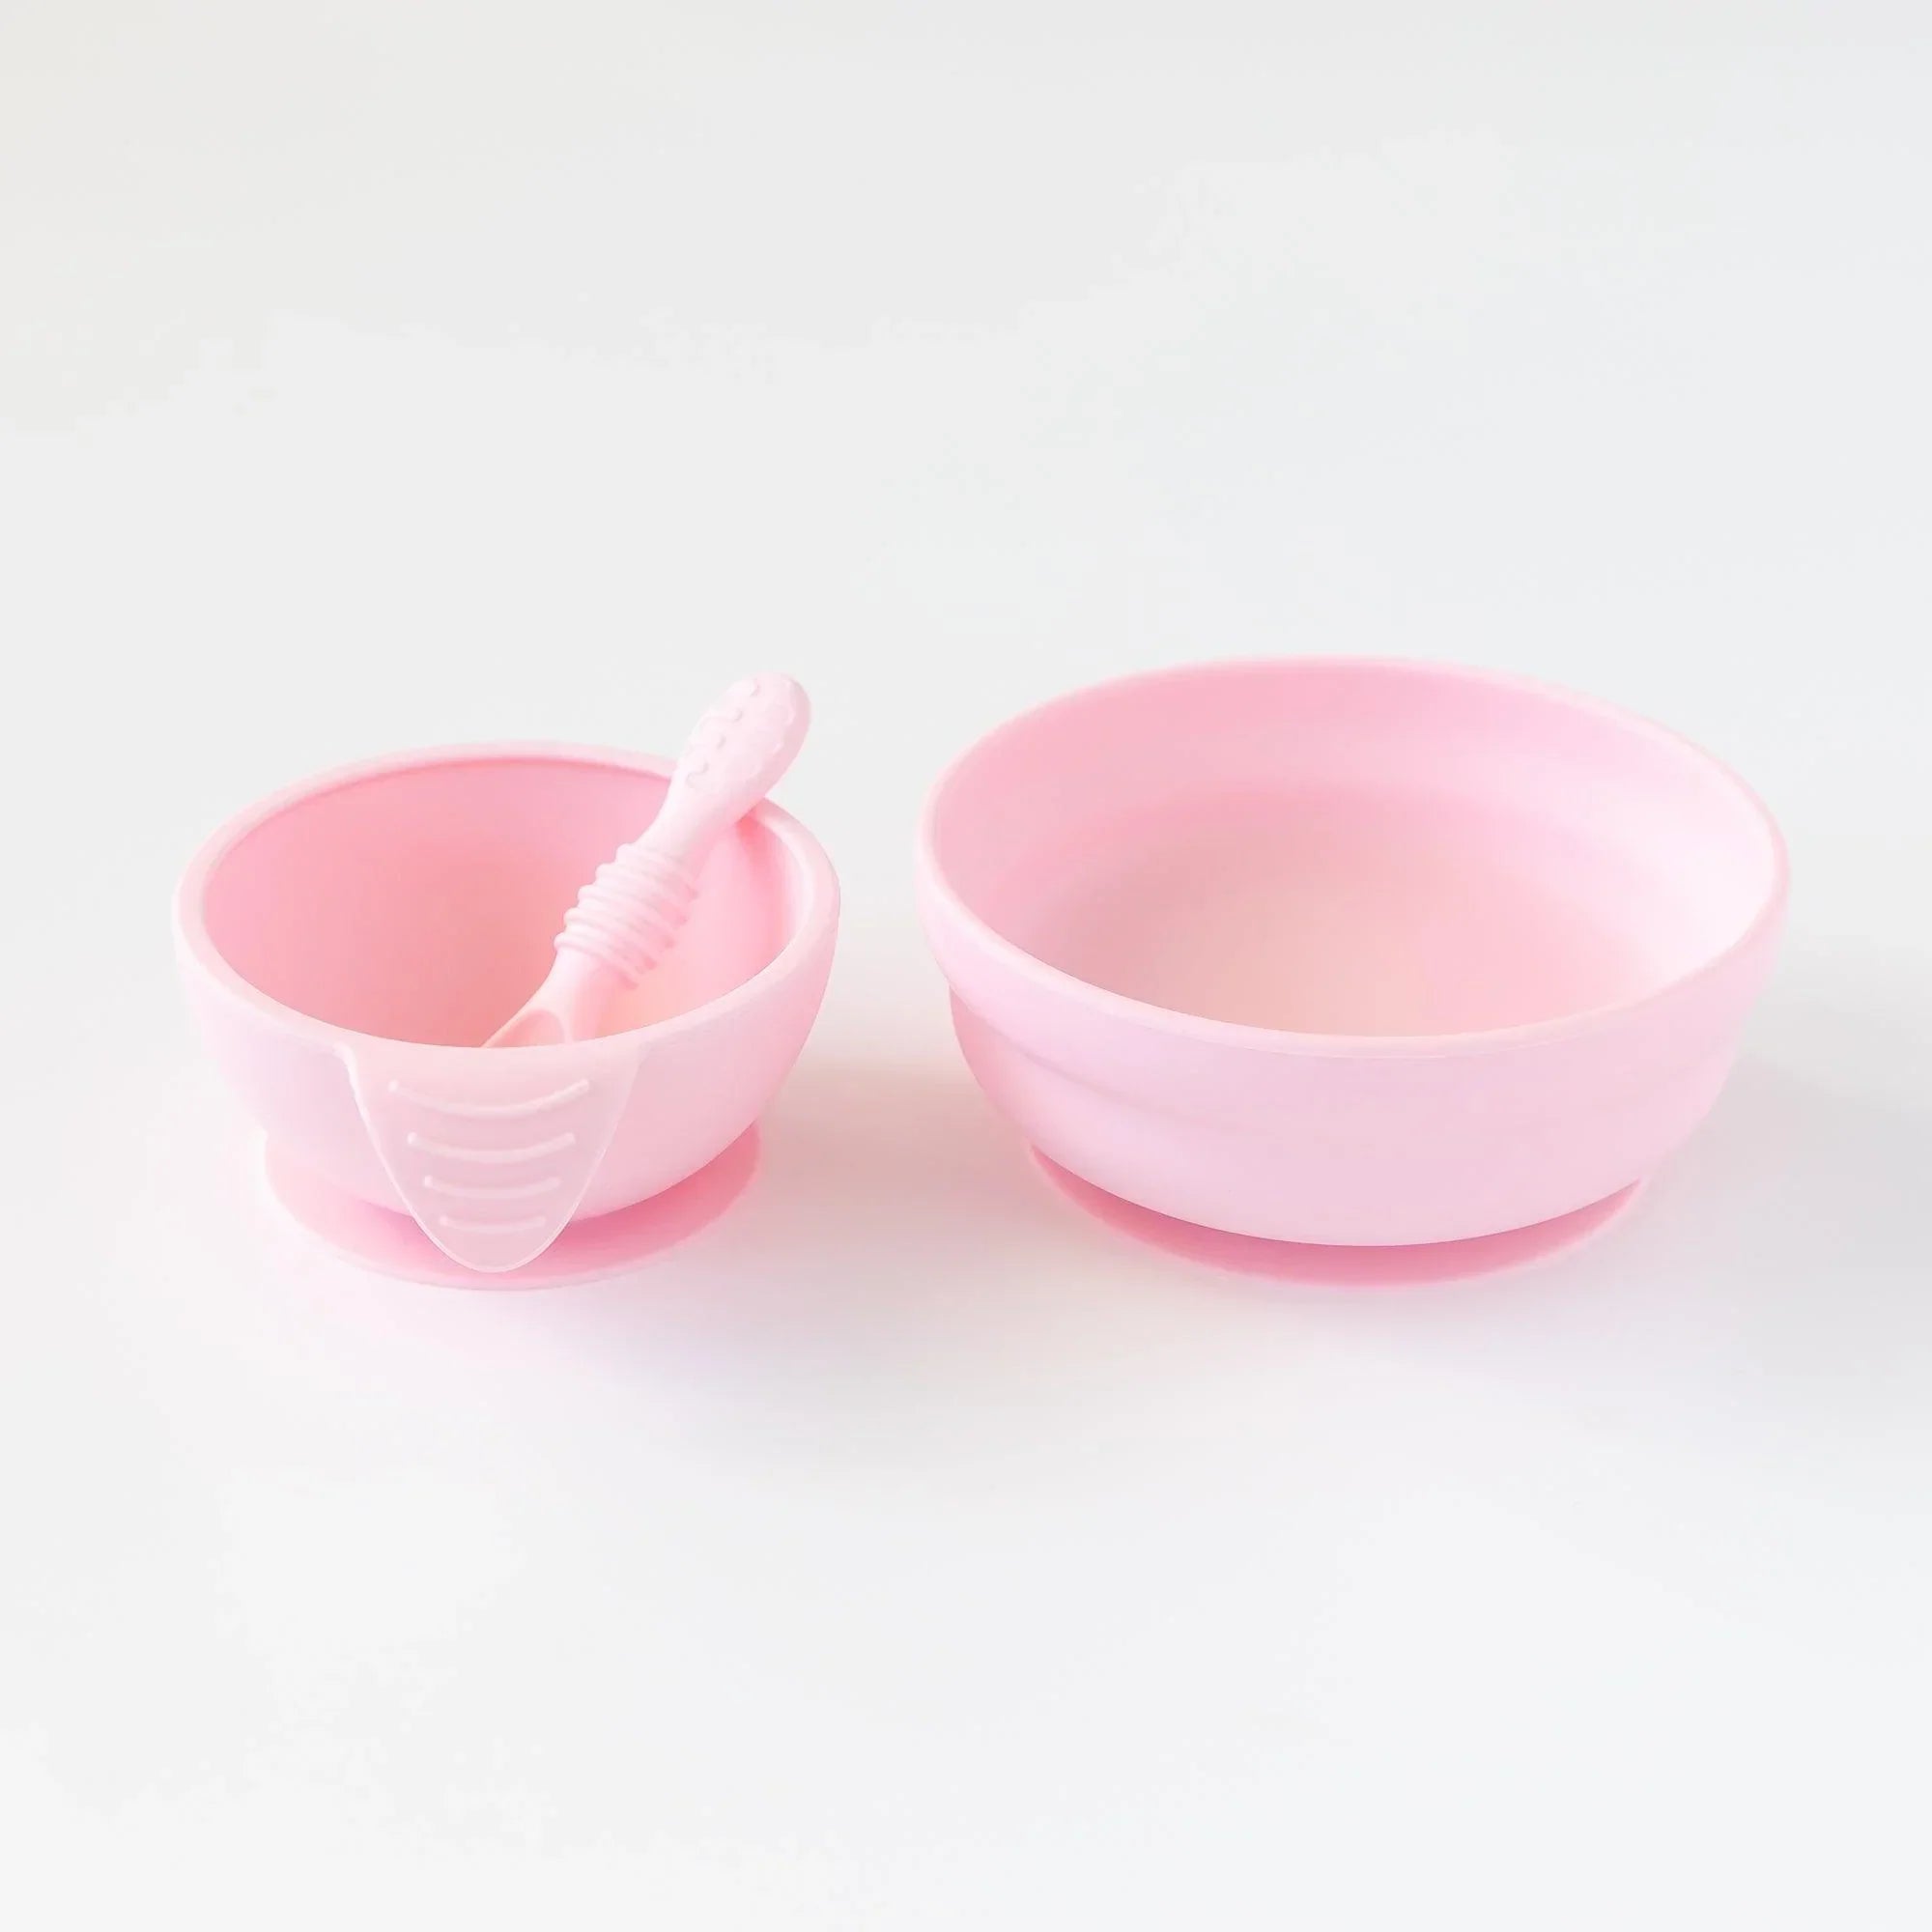 Pink Silicone Suction First Feeding Set with Bowl, Spoon + Lid